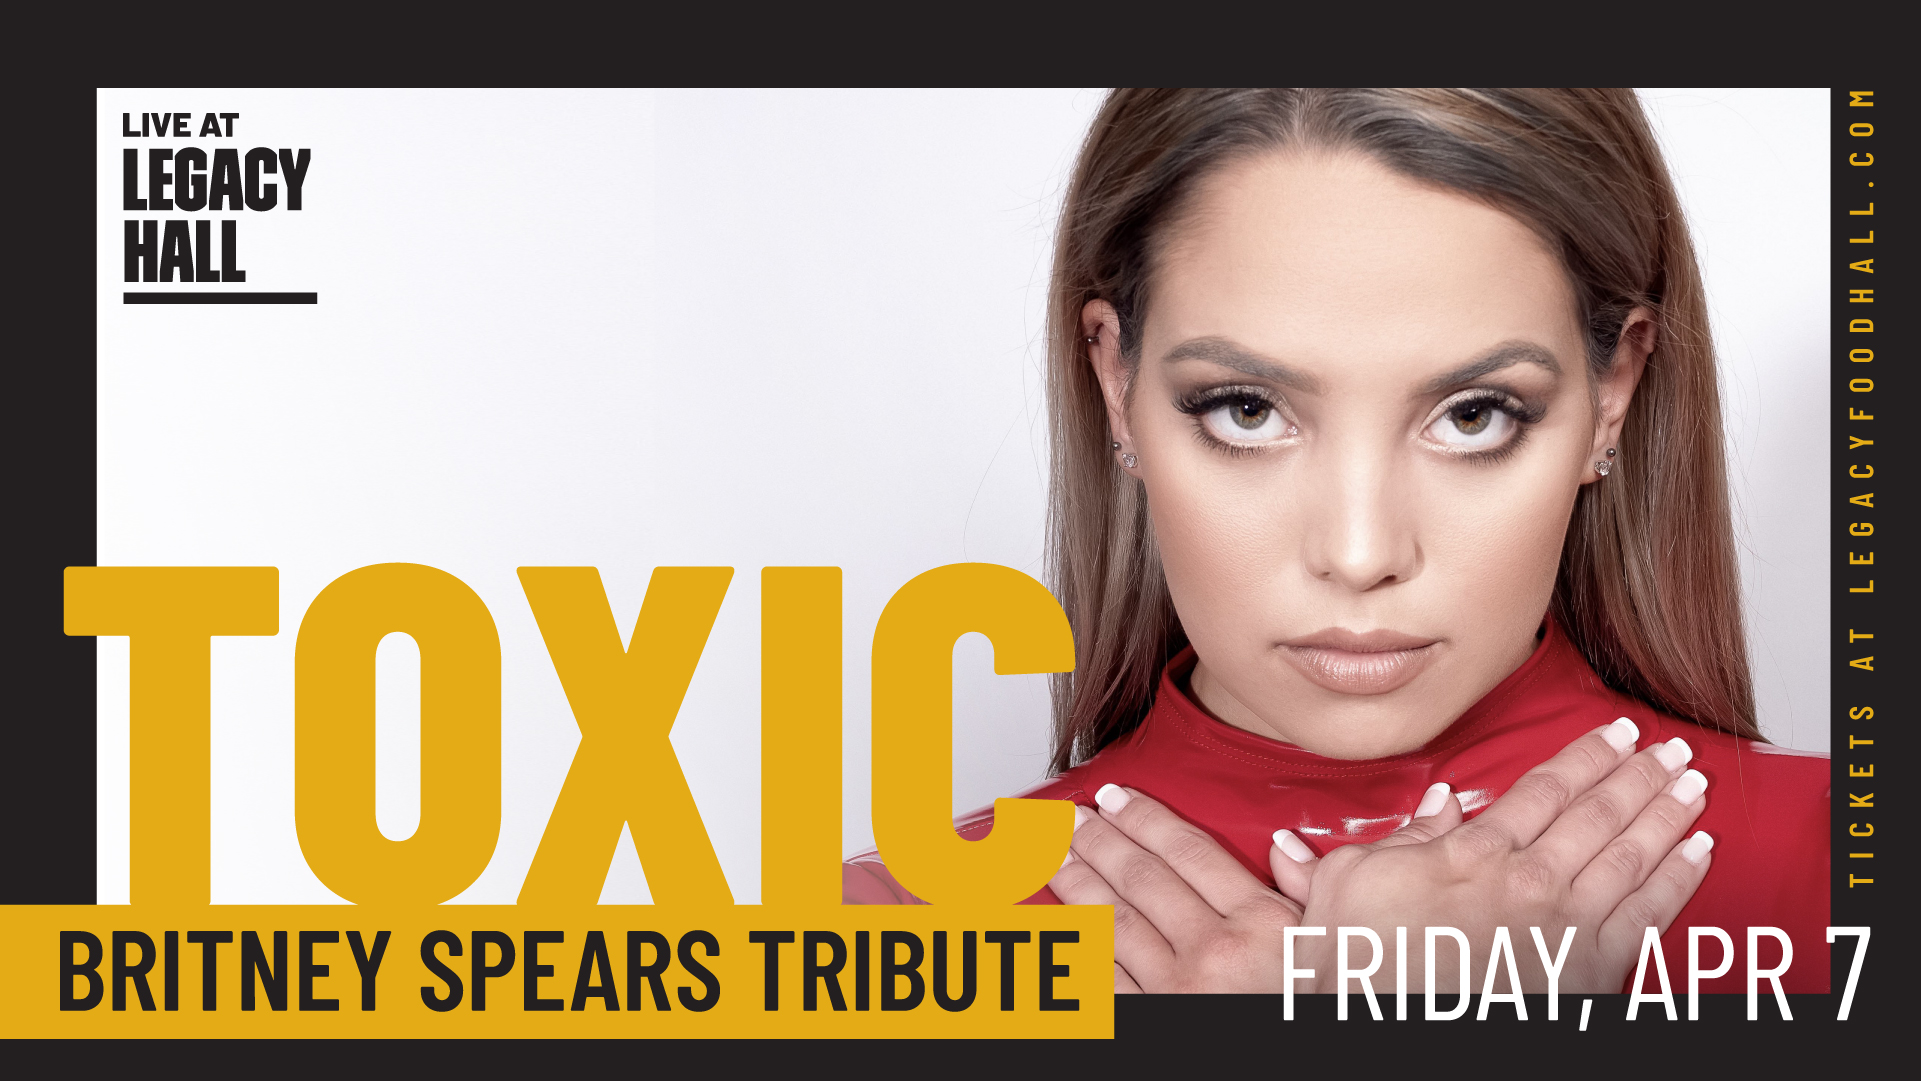 Toxic - Britney Spears Tribute